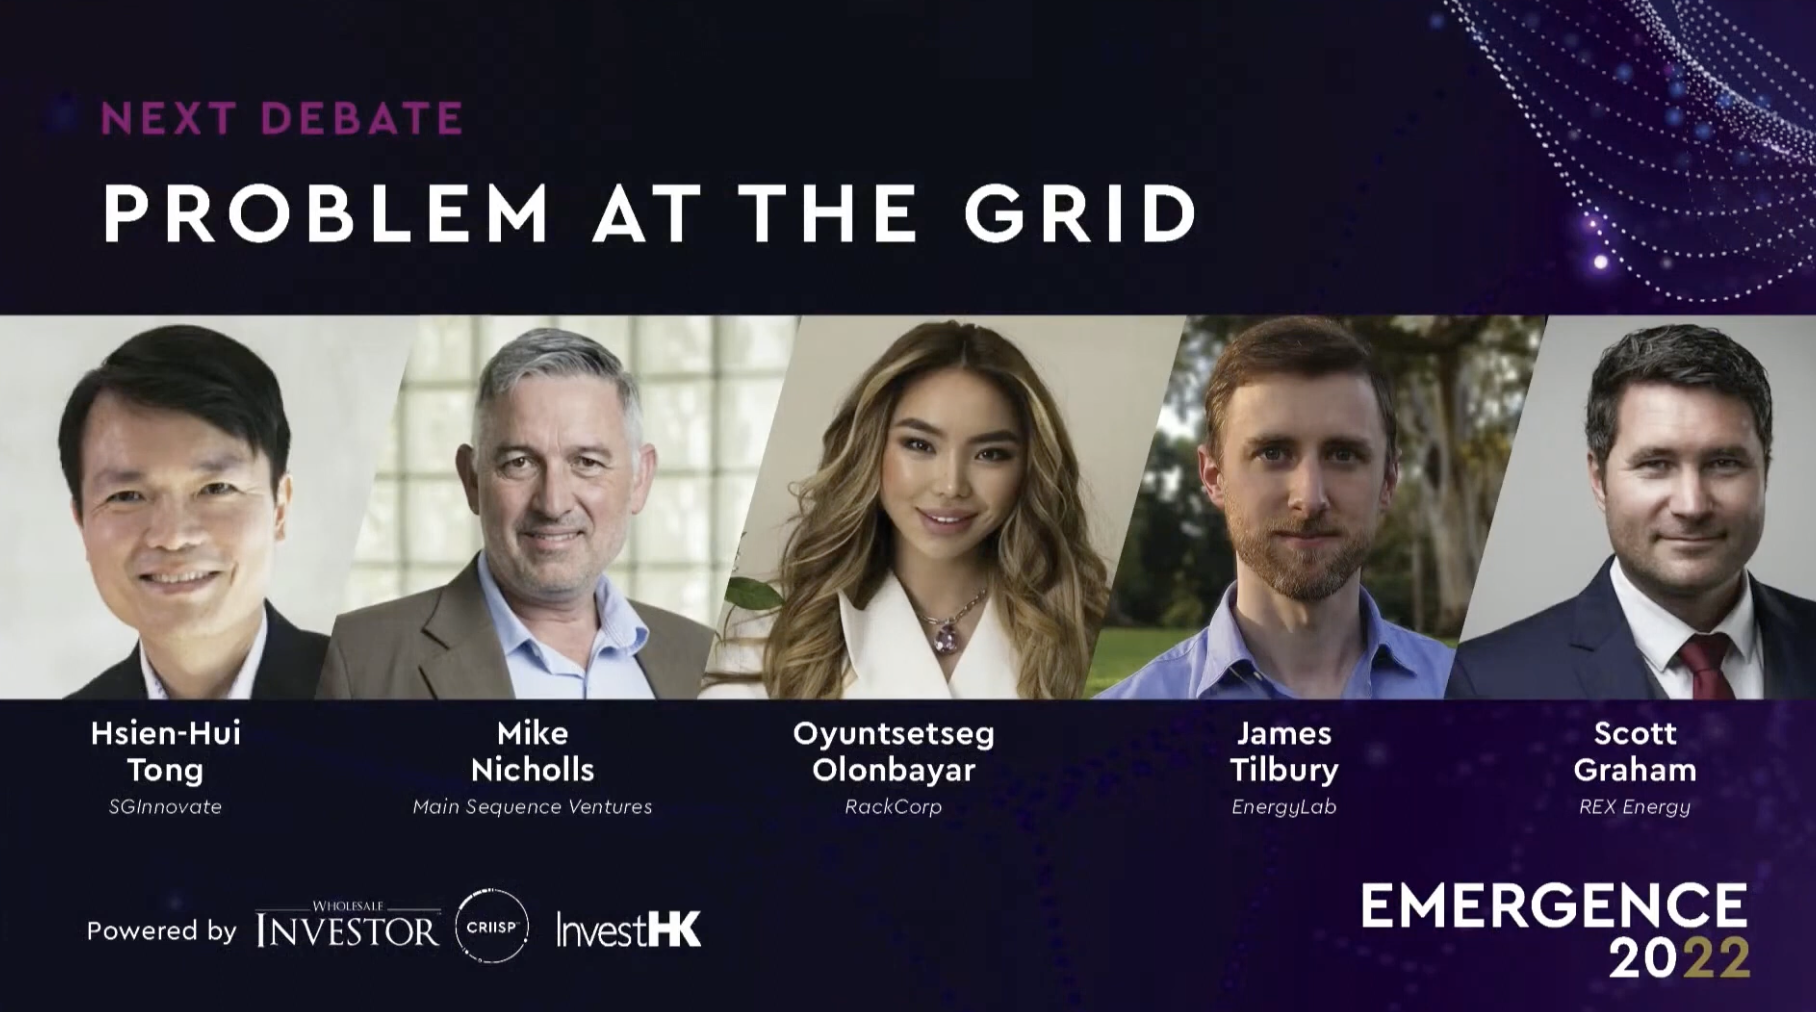 REX Energy - Panel Problem at the Grid